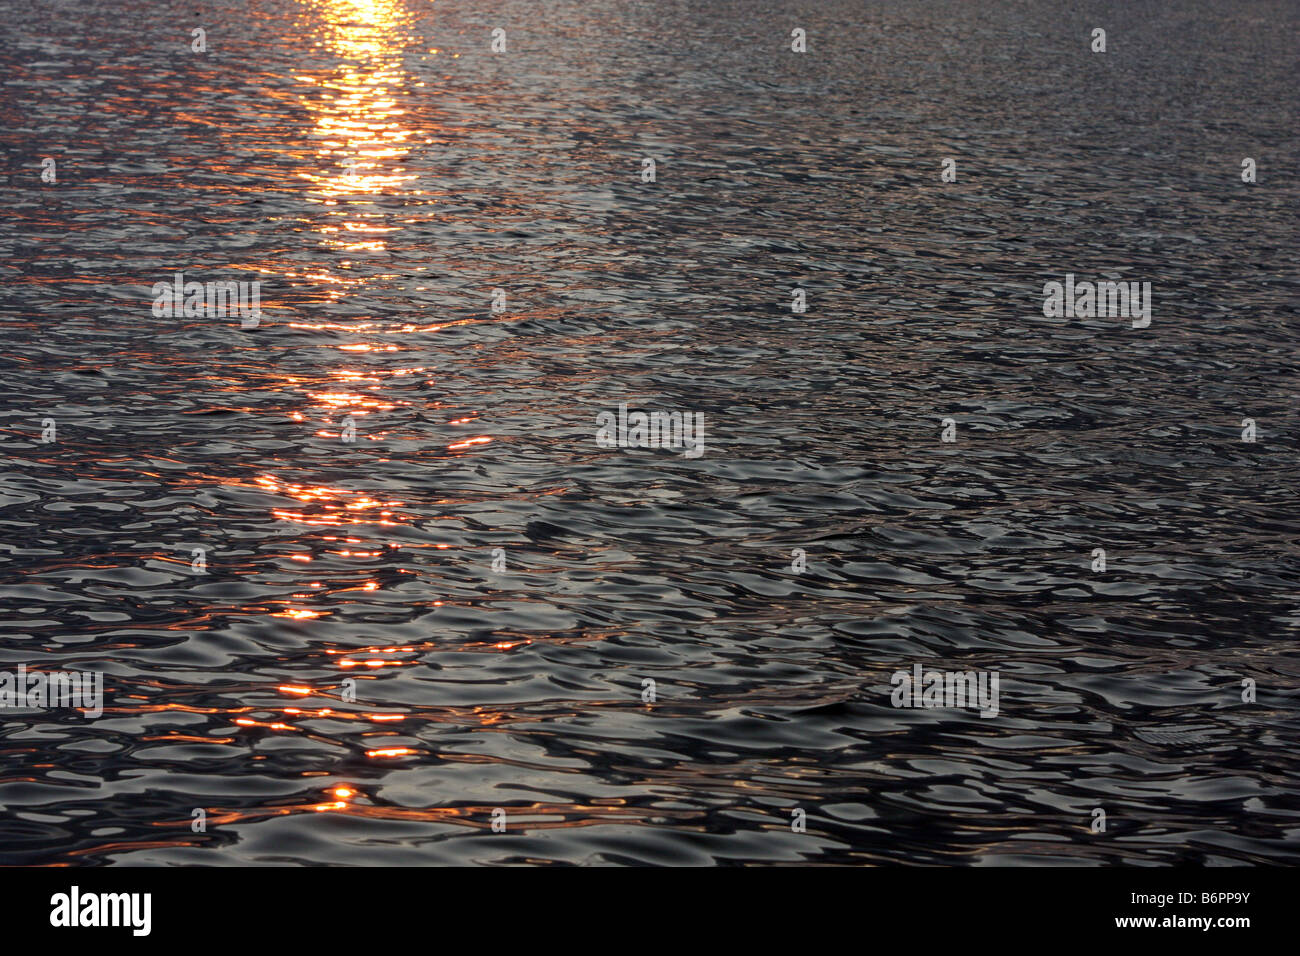 Reflection of the sun as it rises in the Mediterranean sea Stock Photo